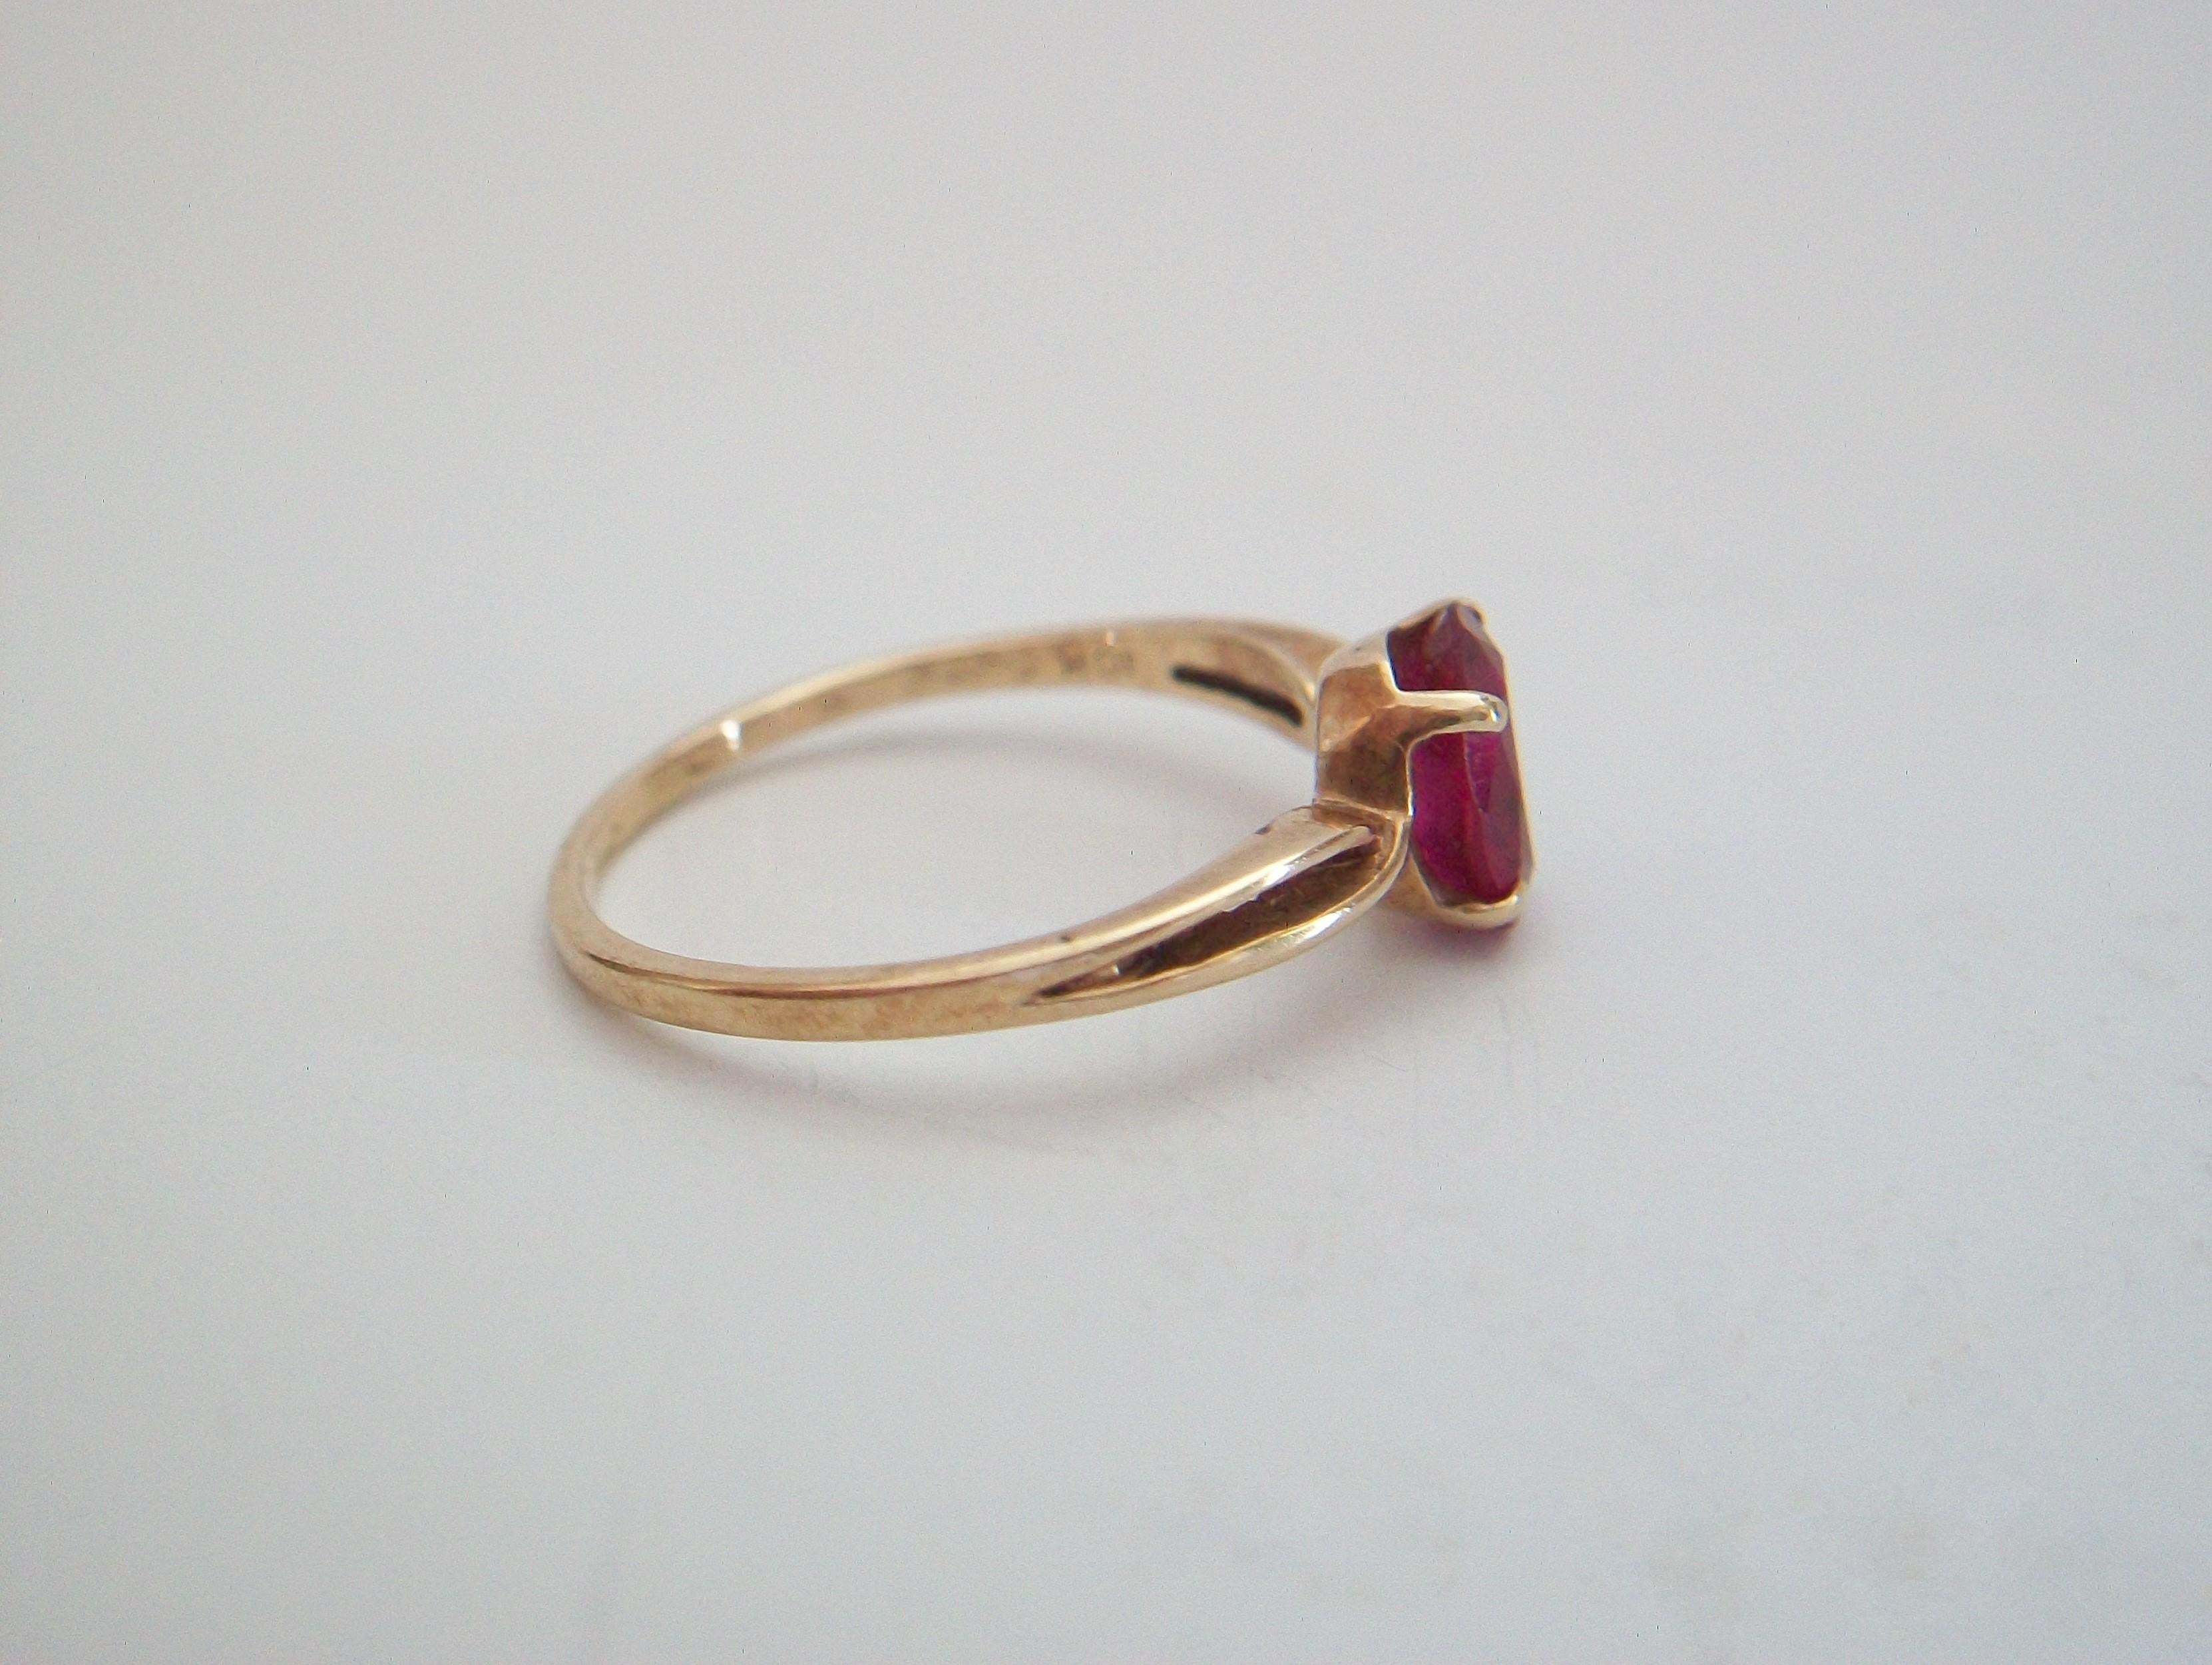 Vintage Red Topaz & 10K Yellow Gold Ring - Size 5.5 - U.S.A. - Circa 1980's In Good Condition For Sale In Chatham, CA